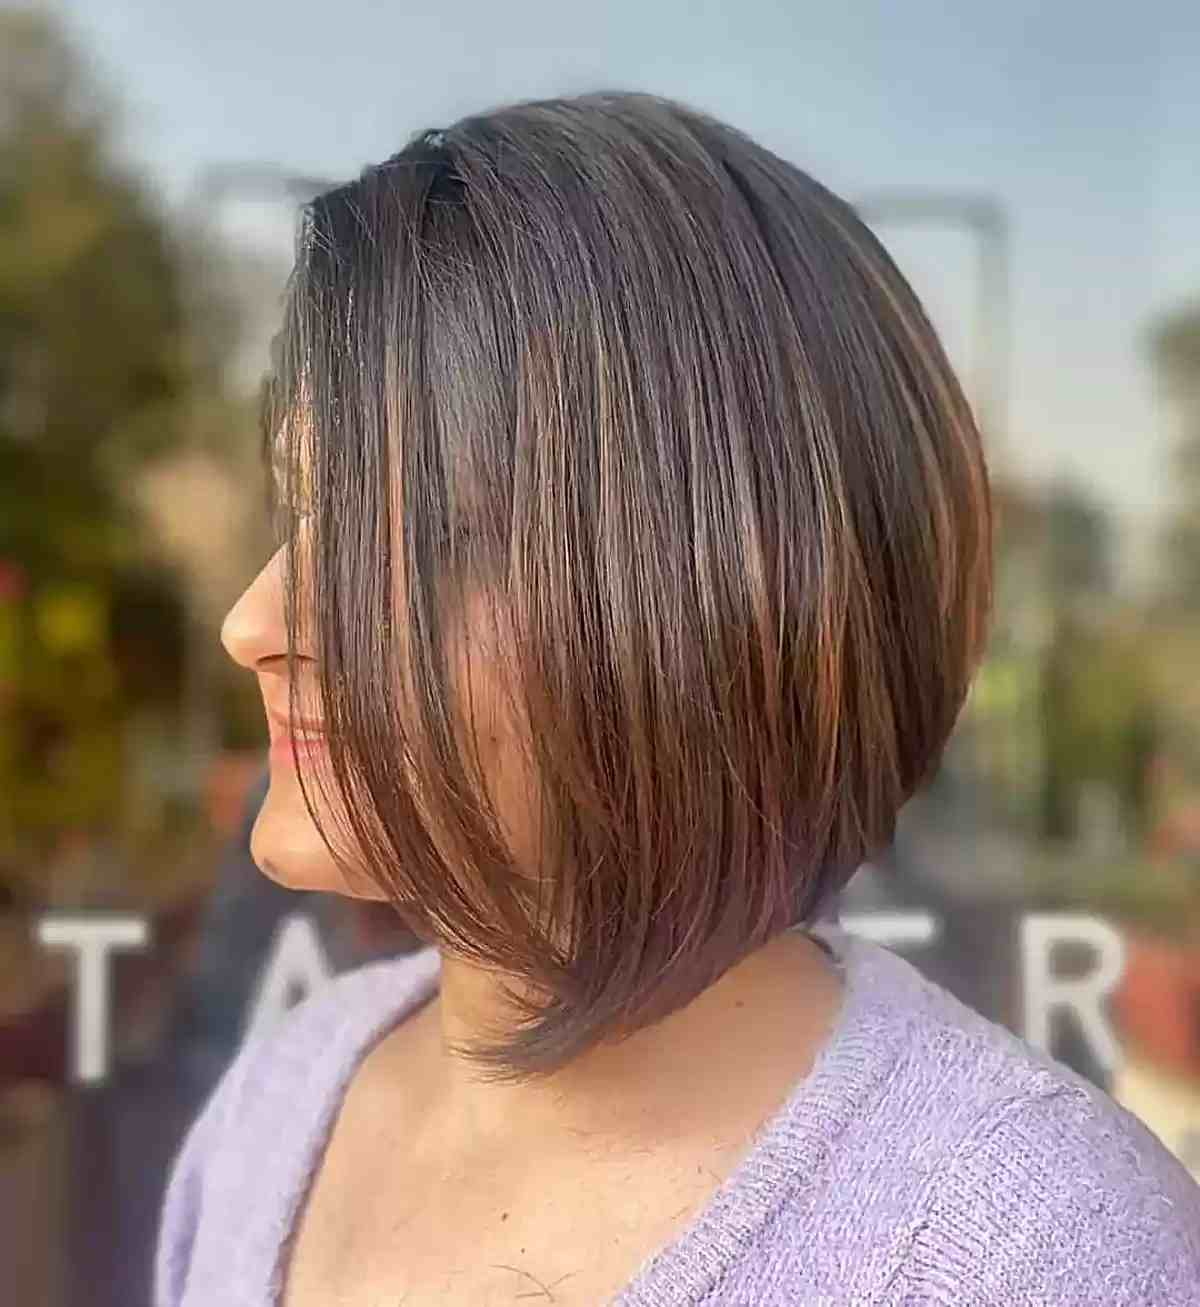 Short Layers Haircuts For Women - Women's Hairstyles